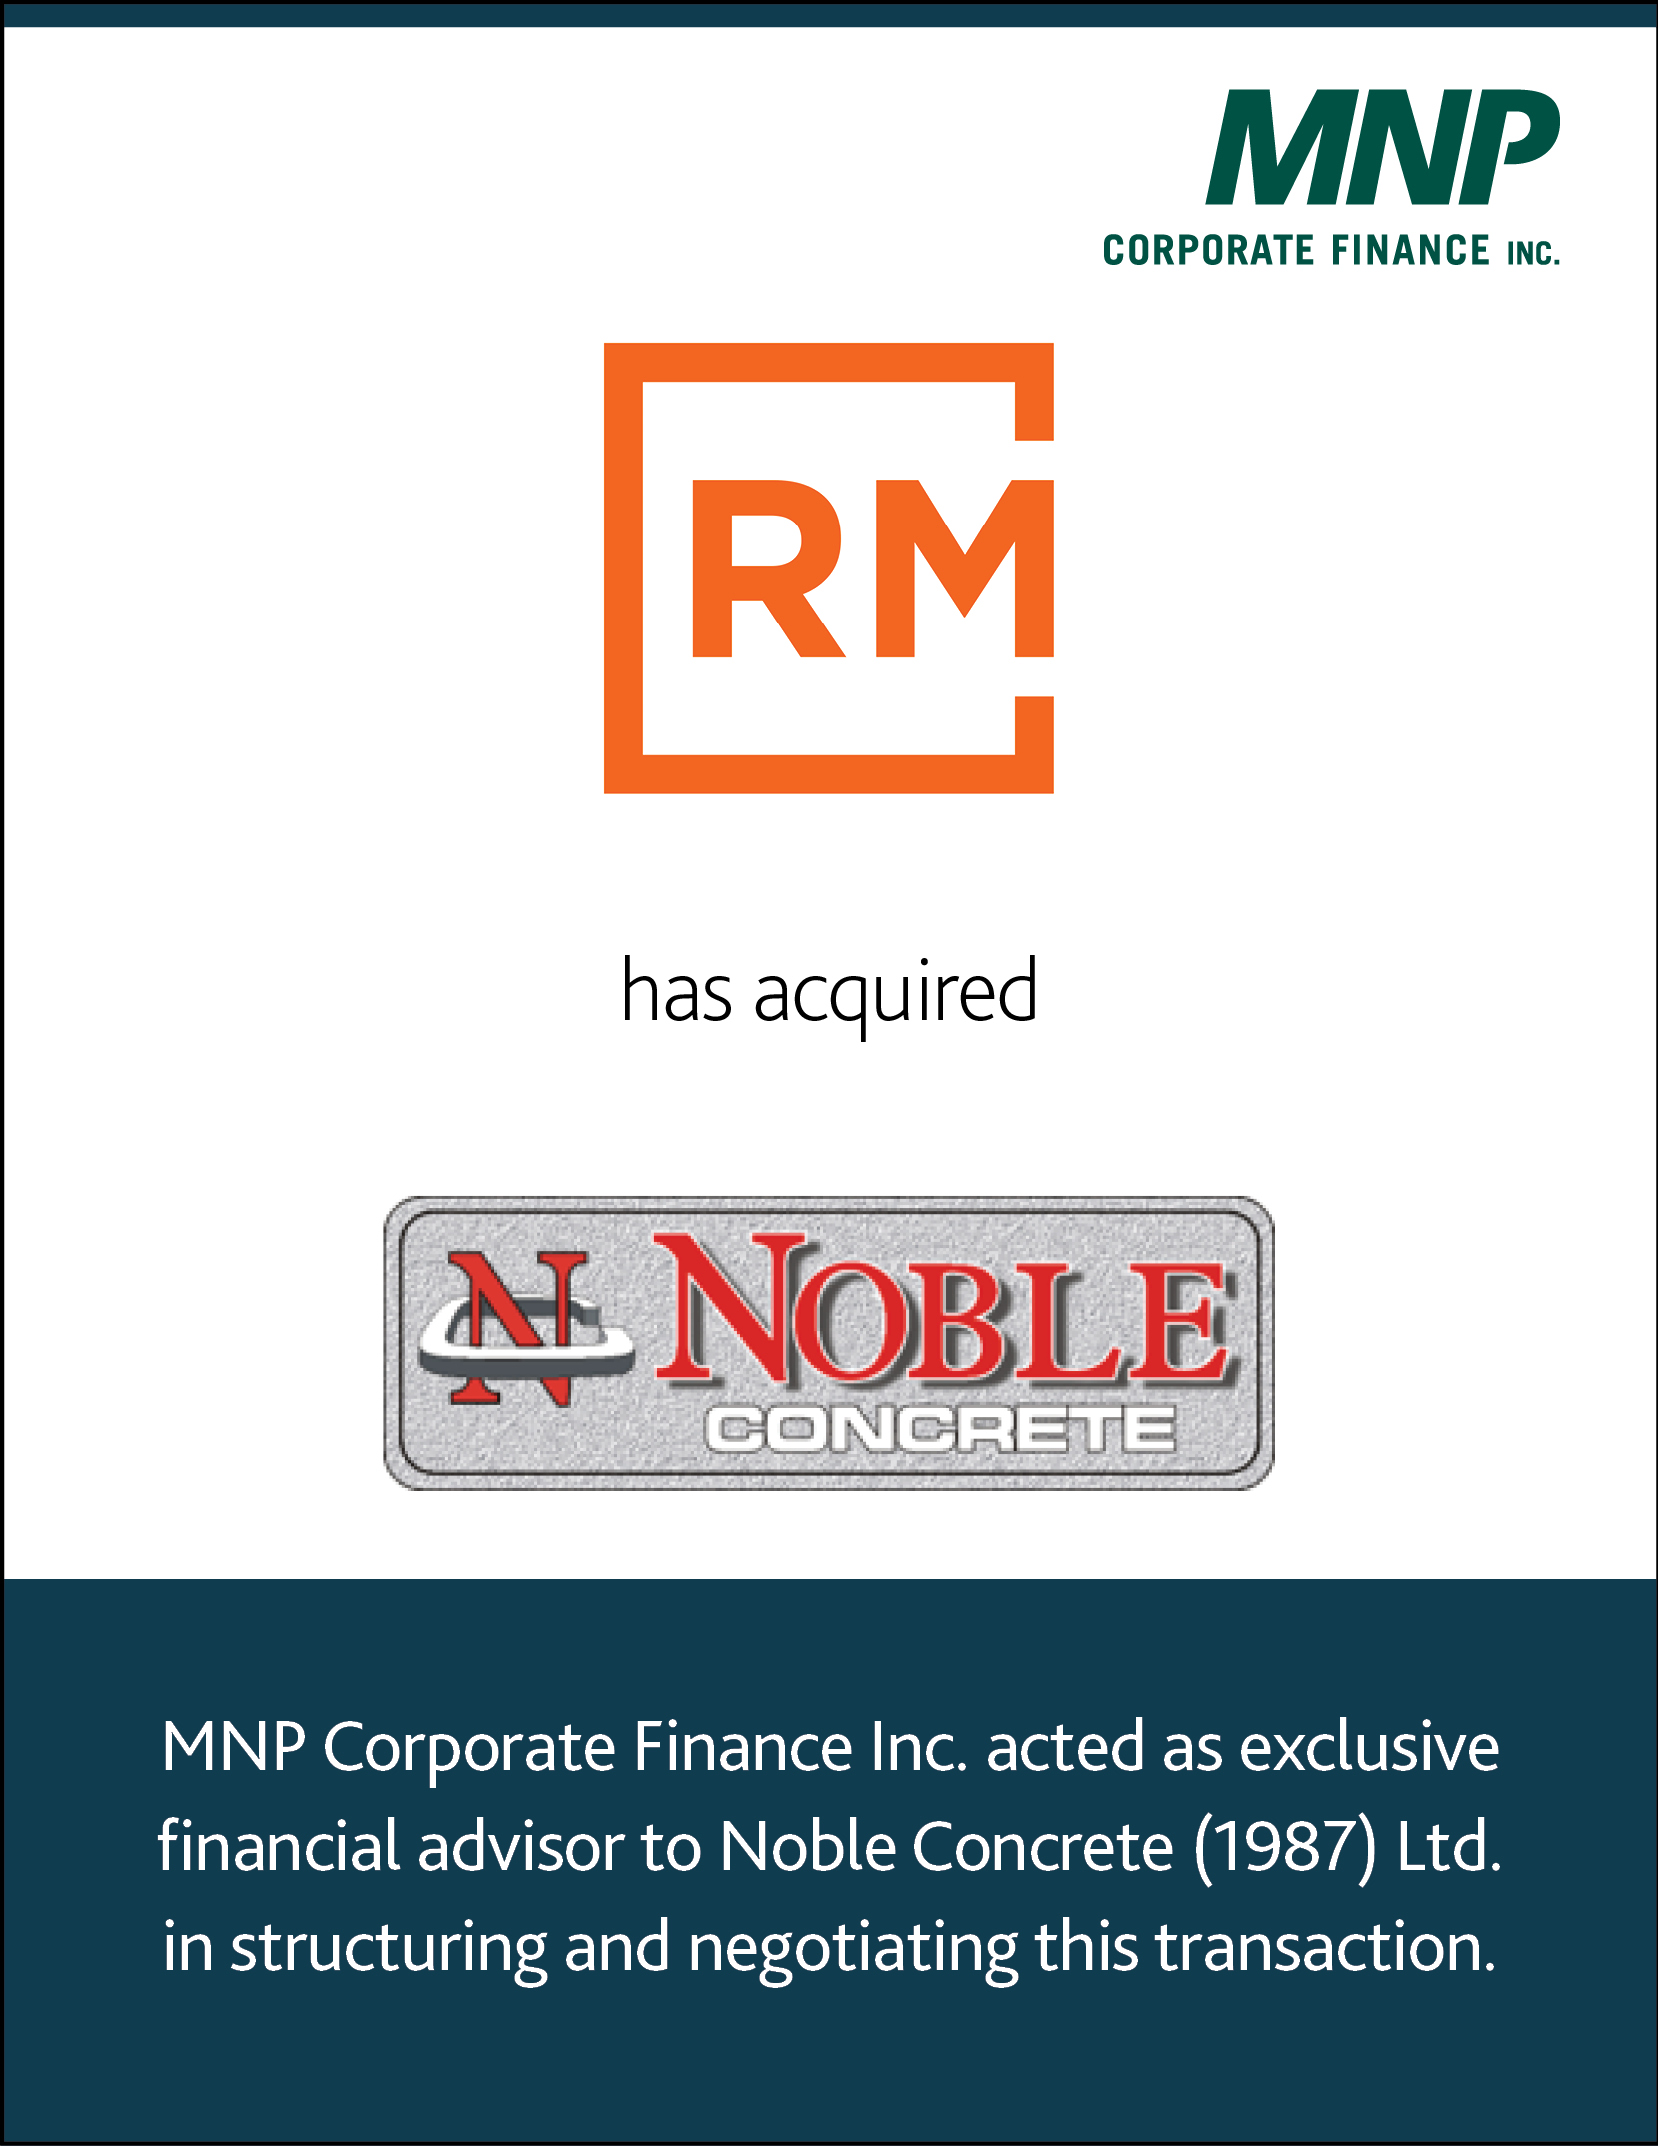 RMC Group of Companies has acquired Noble Concrete (1987) Ltd.